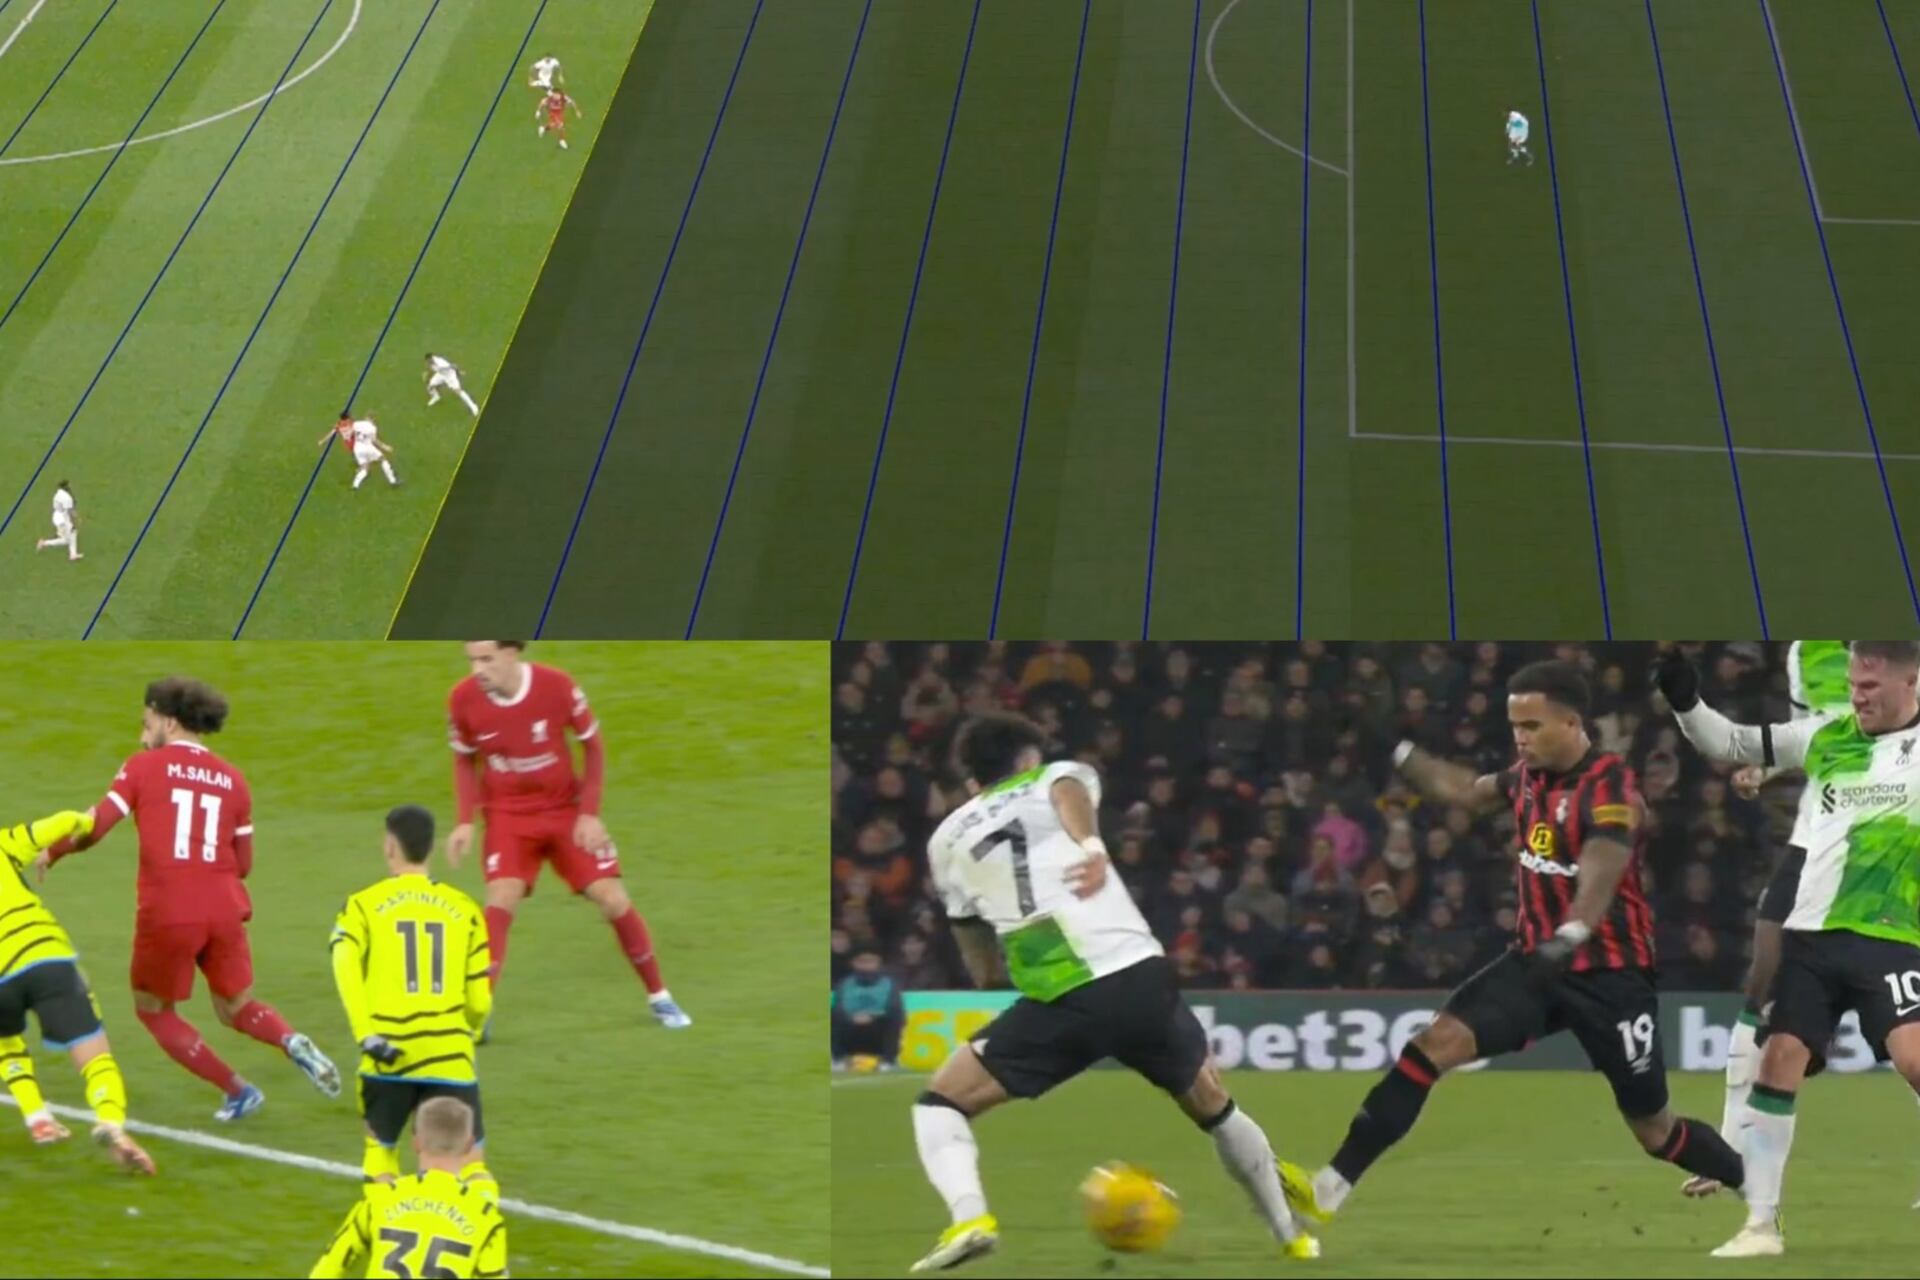 Liverpool involved in another VAR controversy after their Bournemouth win